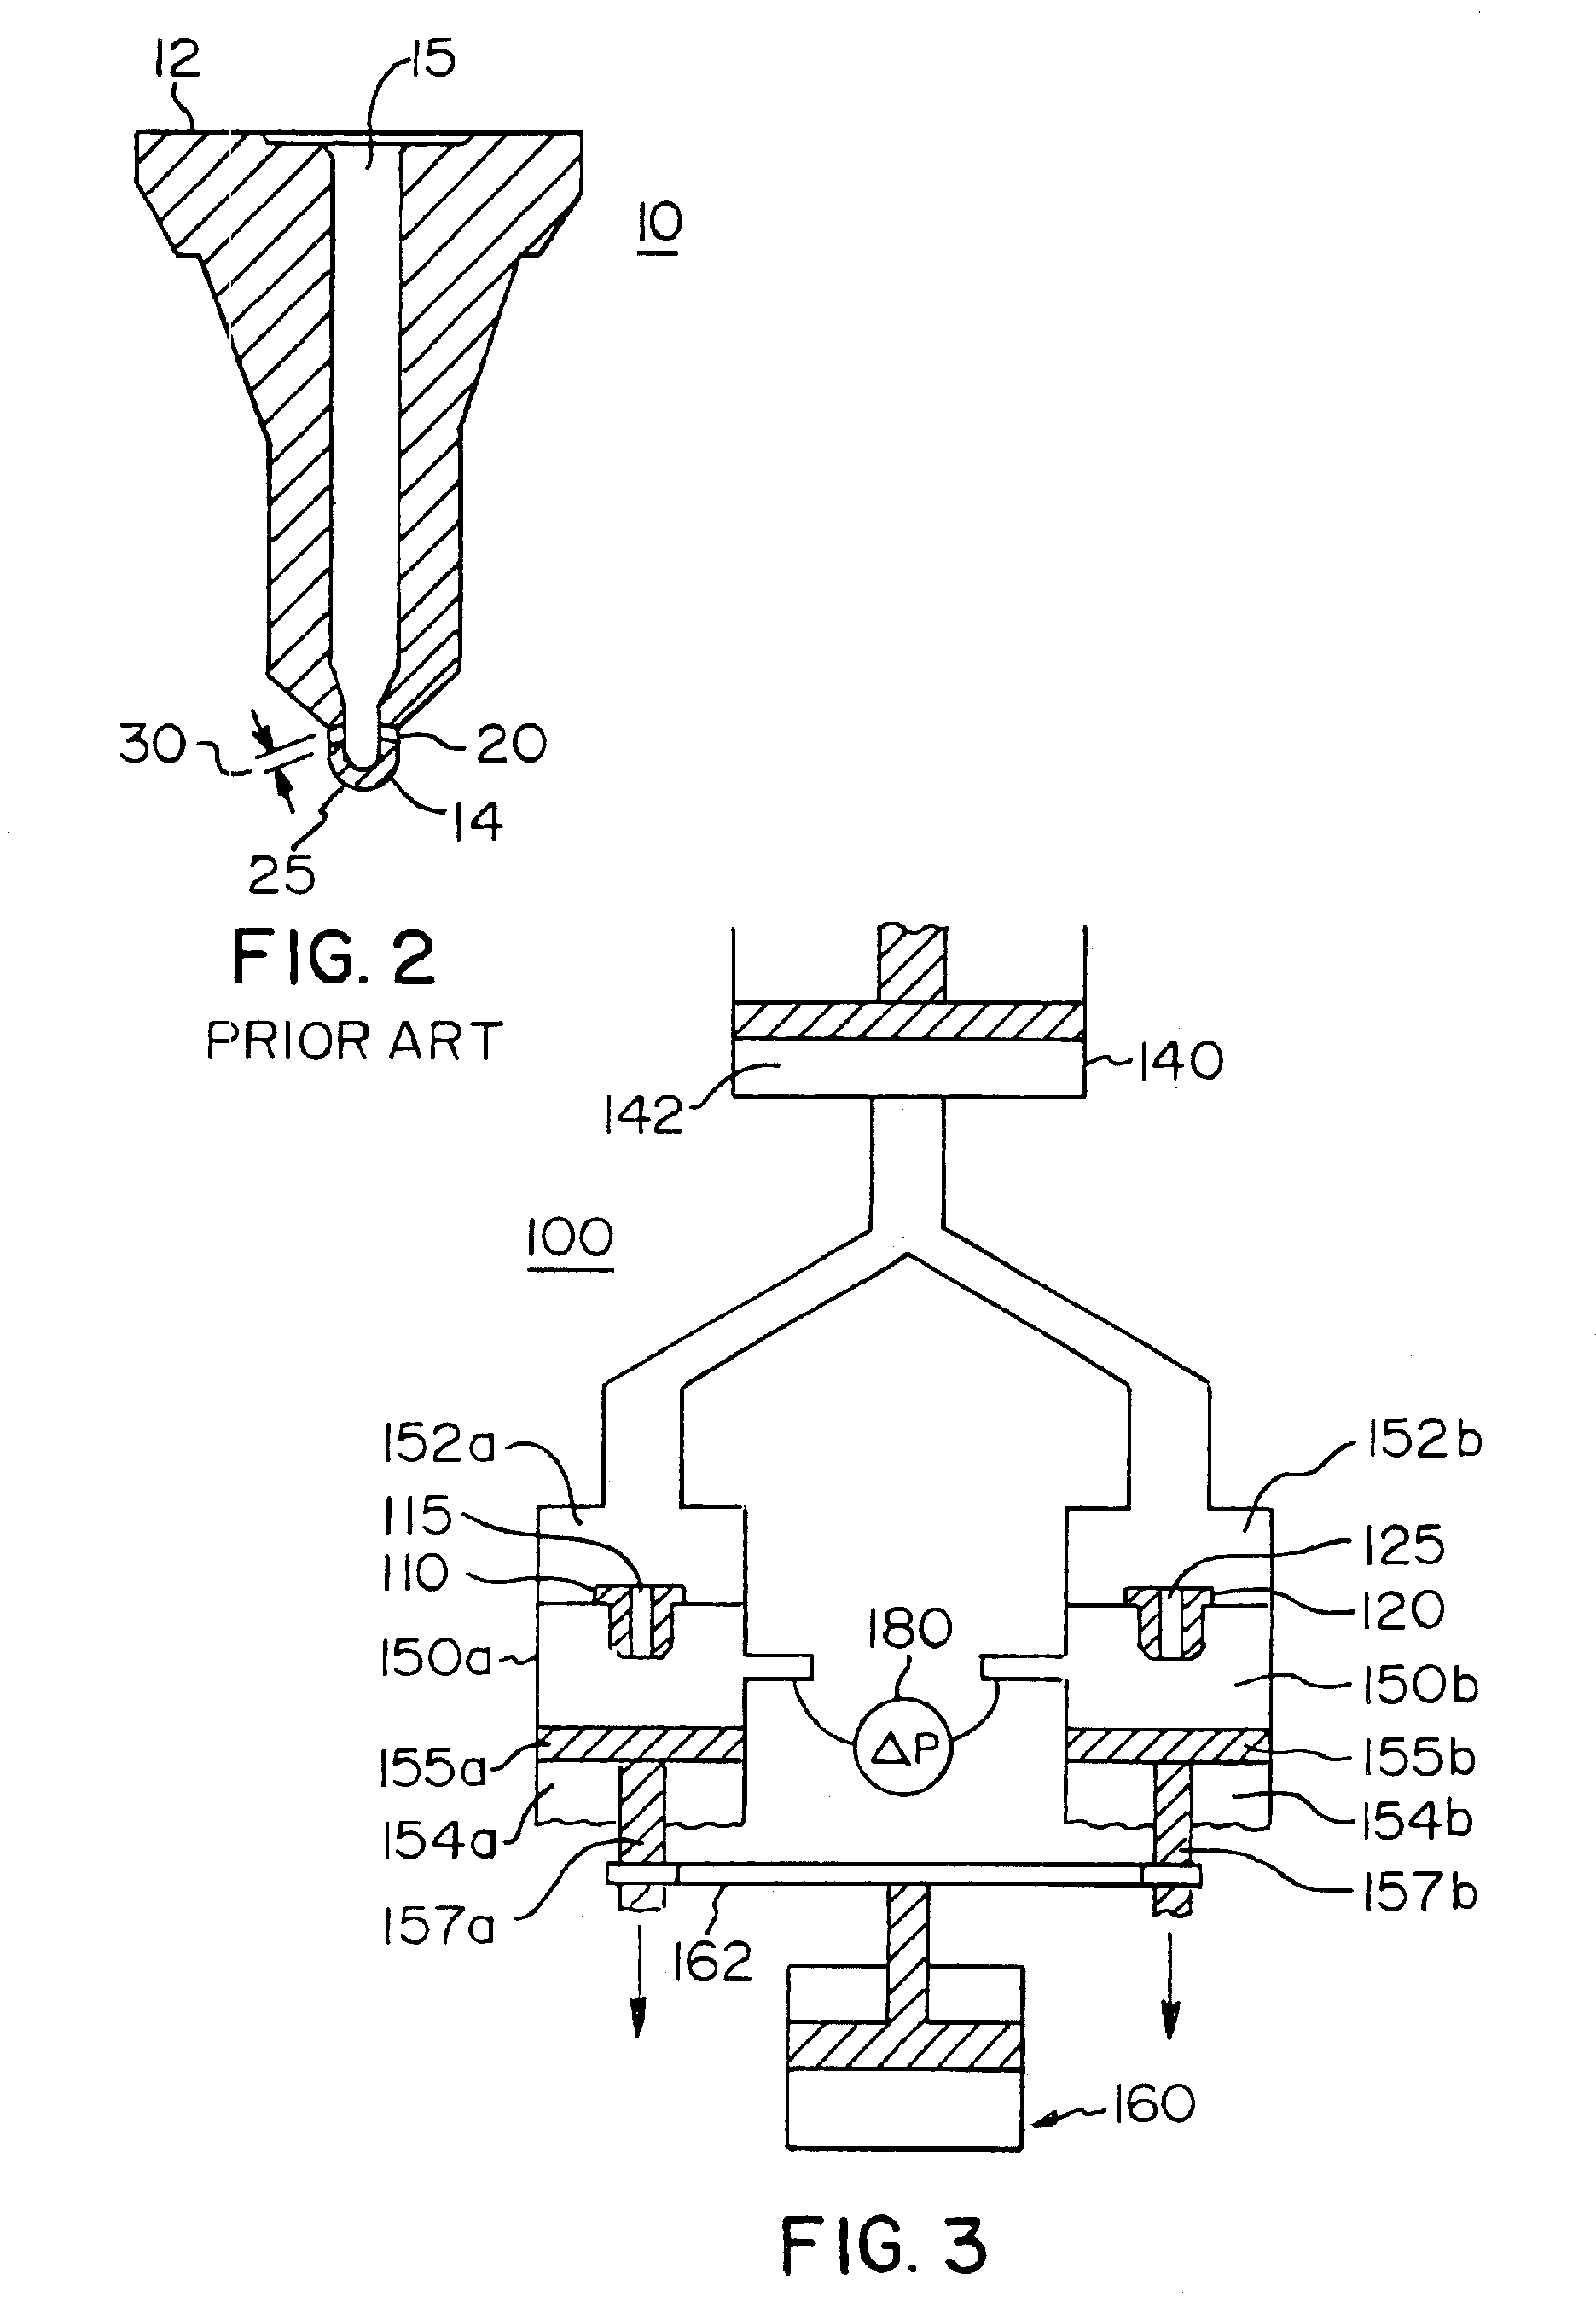 Method and apparatus for measuring flow rate through and polishing a workpiece orifice